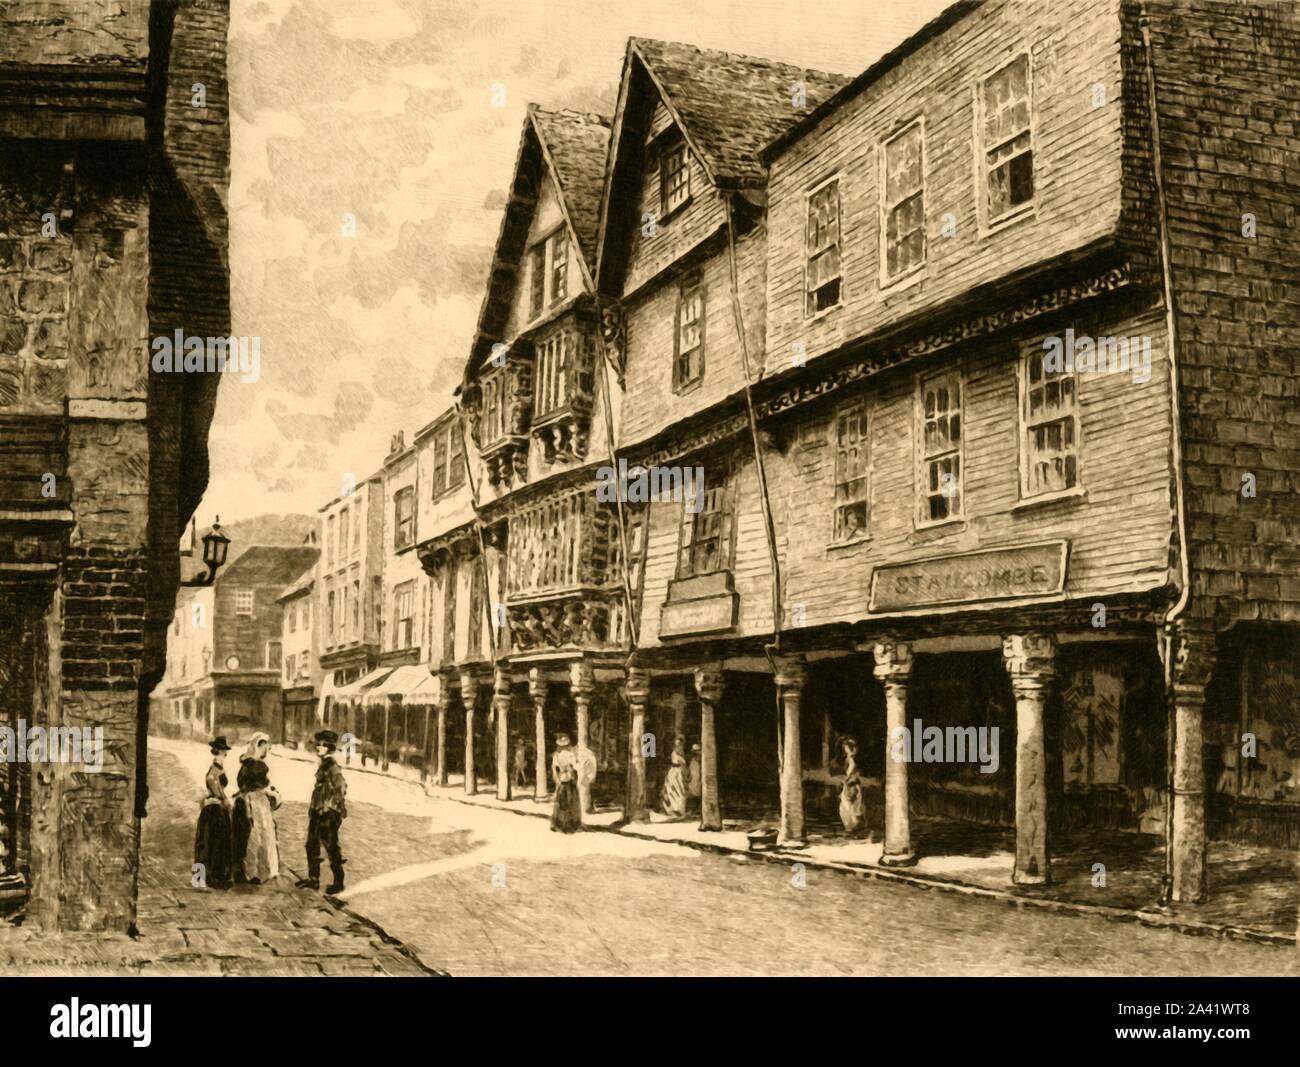 'The Butterwalk, Dartmouth', 1898.  Built from 1635-1640 the Butterwalk in Dartmouth is an example of a Tudor building with intricately carved wooden fascia supported by granite columns.  From &quot;Our Own Country, Volume V&quot;. [Cassell and Company, Limited, London, Paris &amp; Melbourne, 1898] Stock Photo